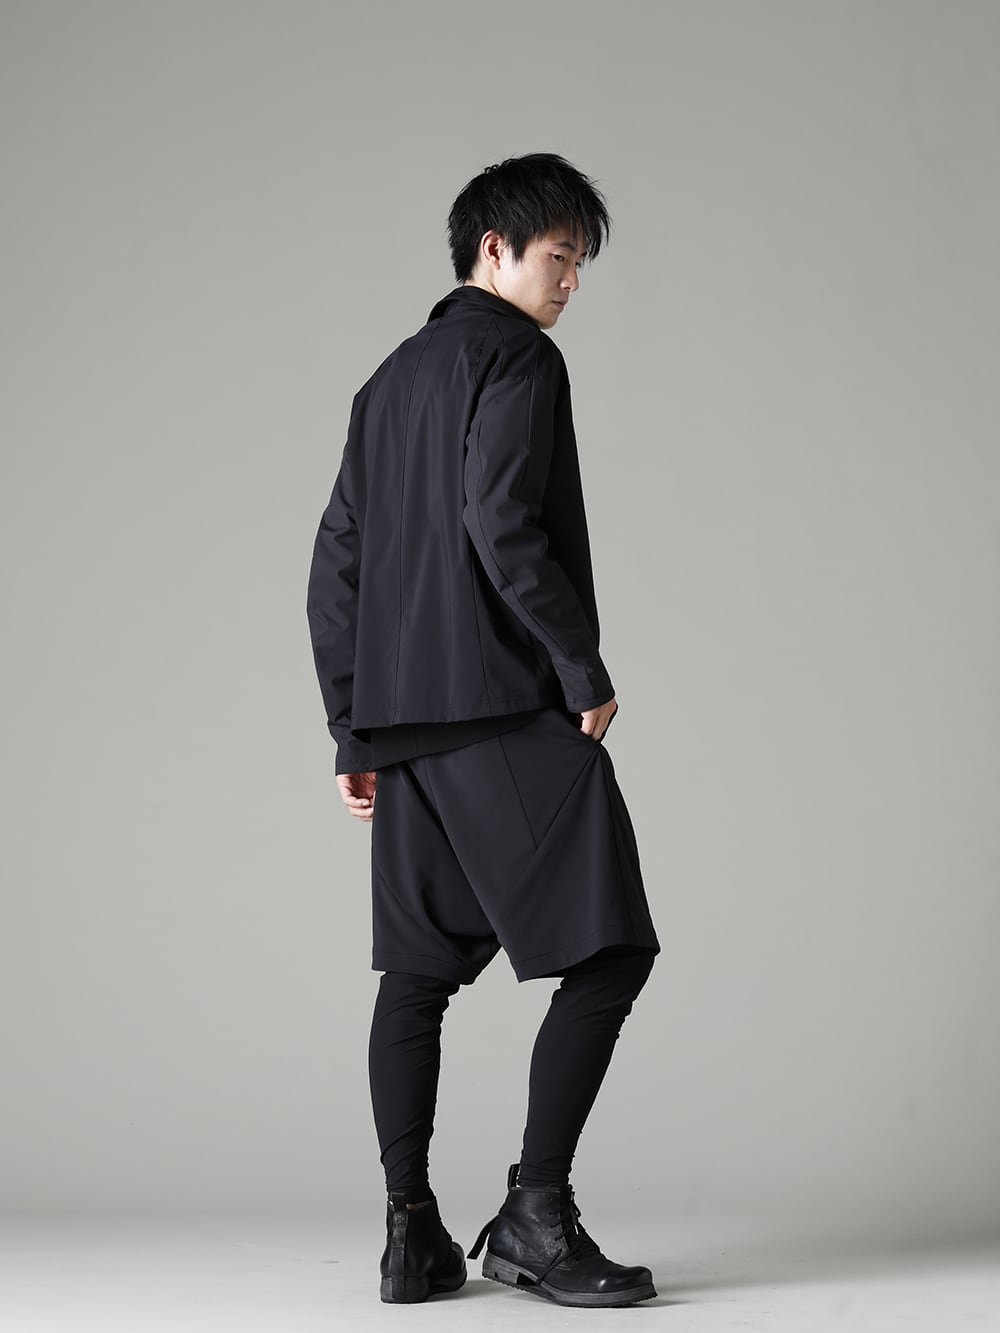 DEVOA EXIST 22-23AW ”Layered Pants Stretch Dry Skin” - FASCINATE BLOG